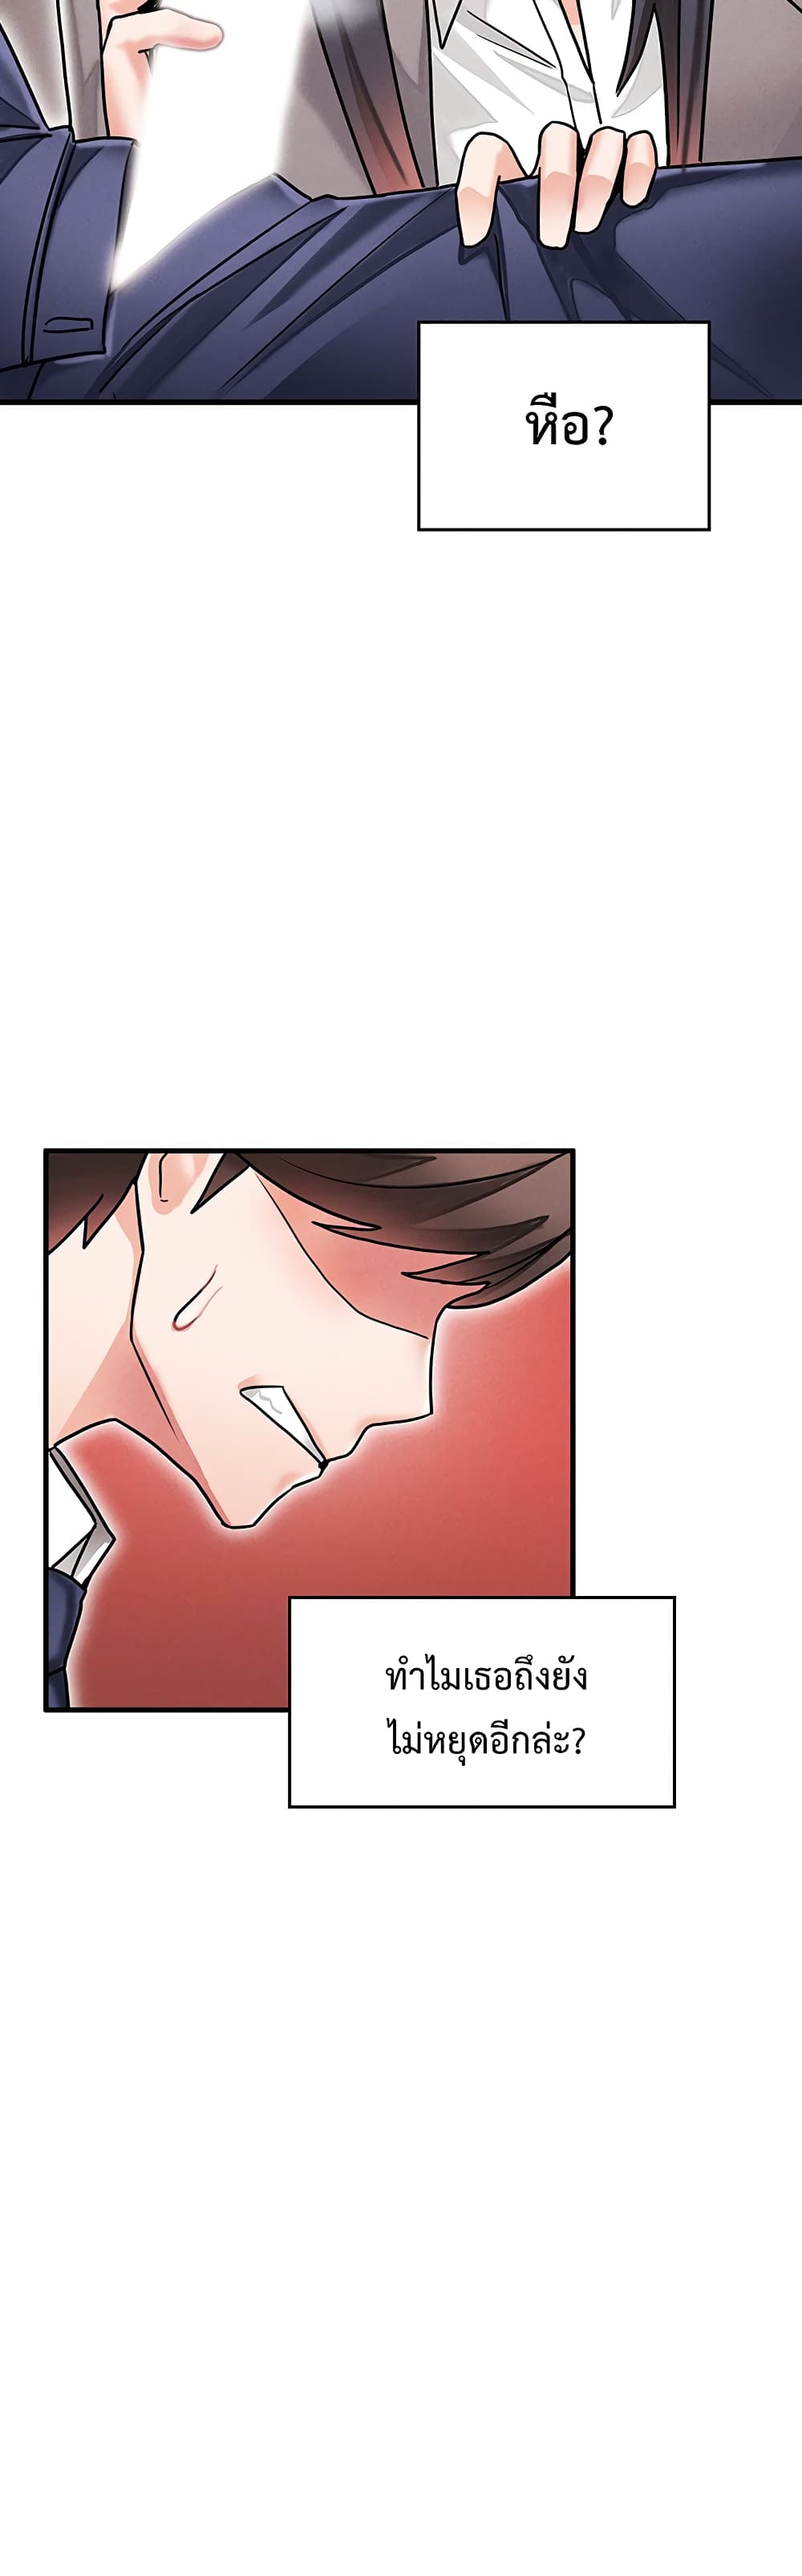 Relationship Reverse Button: Let’s Make Her Submissive 2 ภาพที่ 10